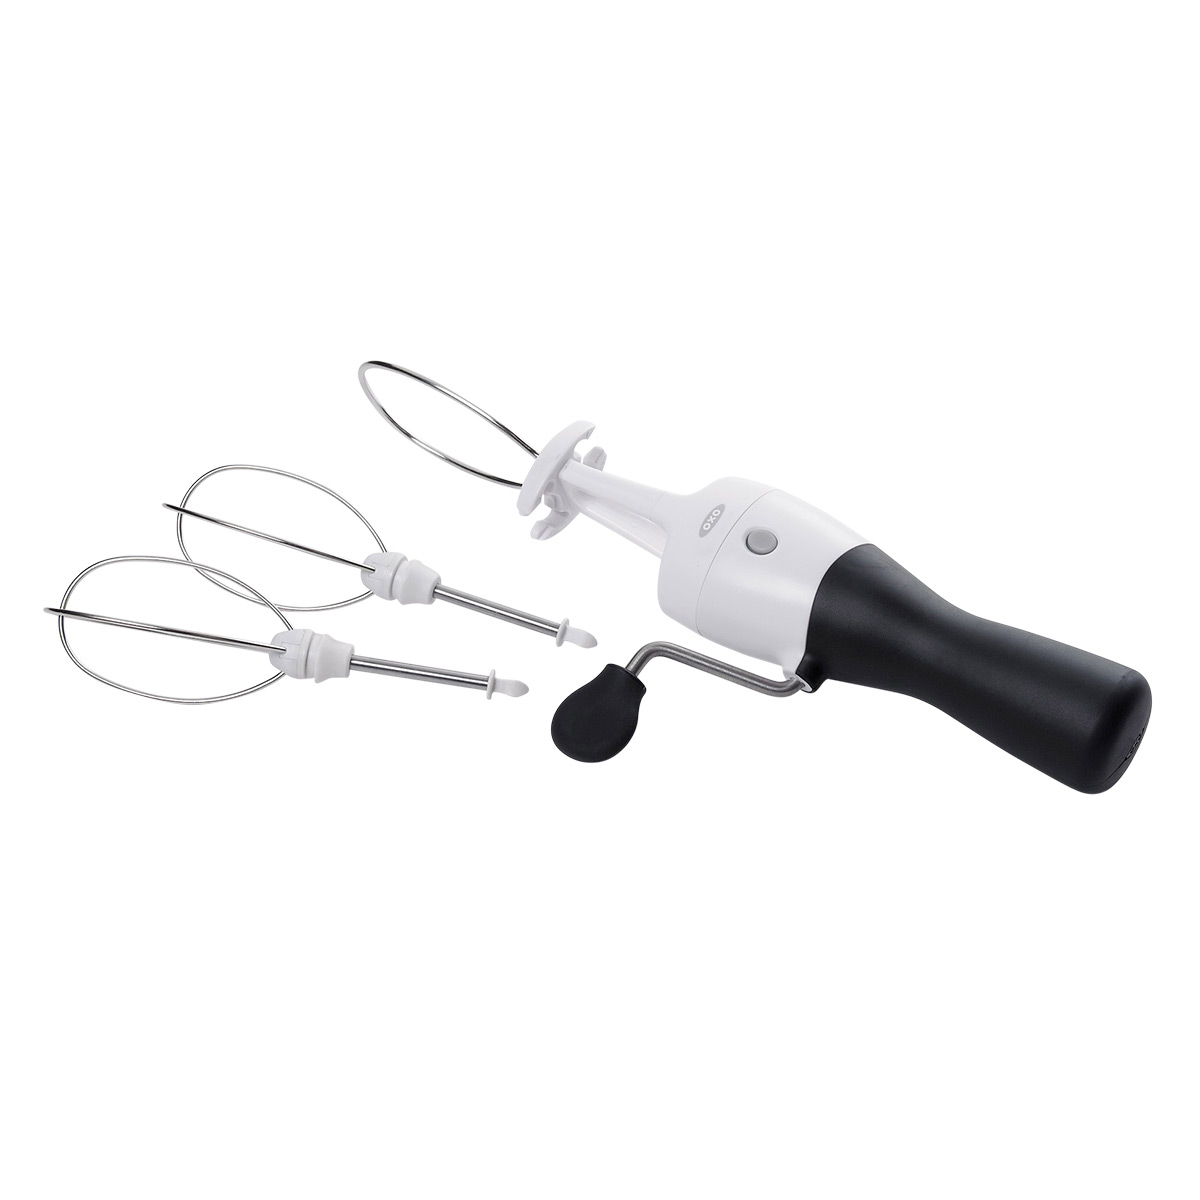 https://www.containerstore.com/catalogimages/427741/10086150-OXO-Egg-Beater-VEN6.jpg